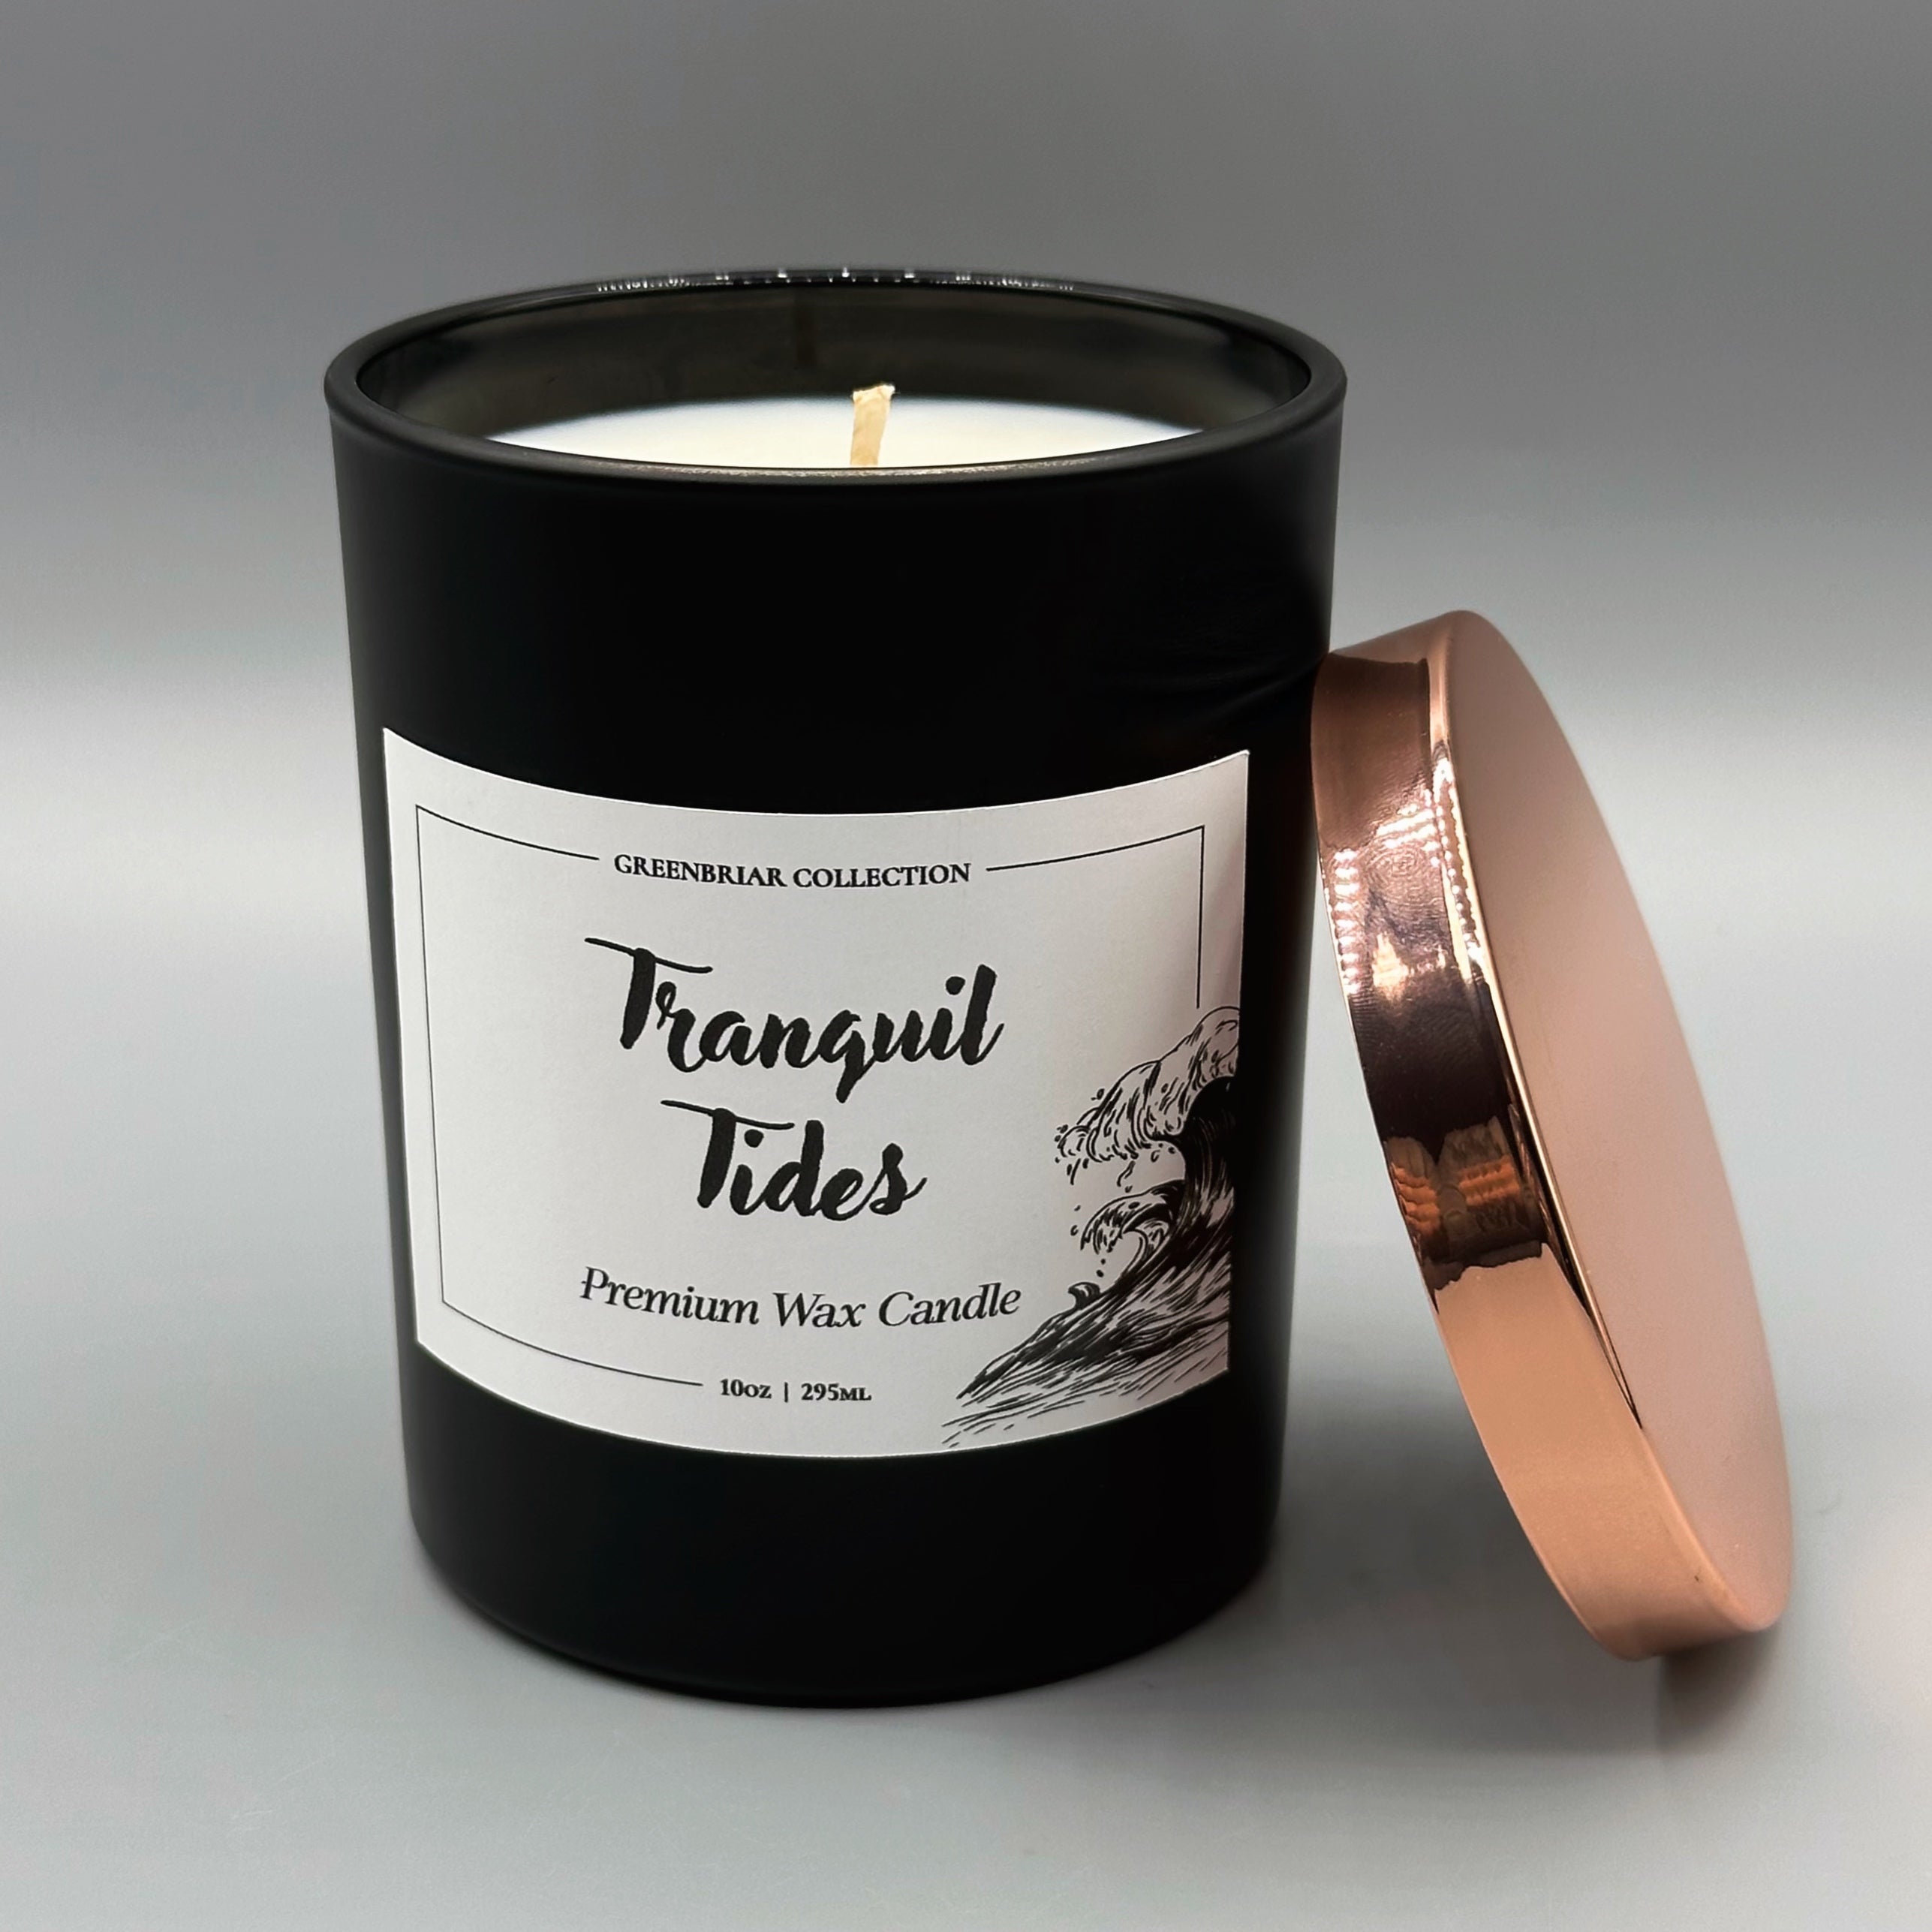 Premium Wax Candle | Tranquil Tides